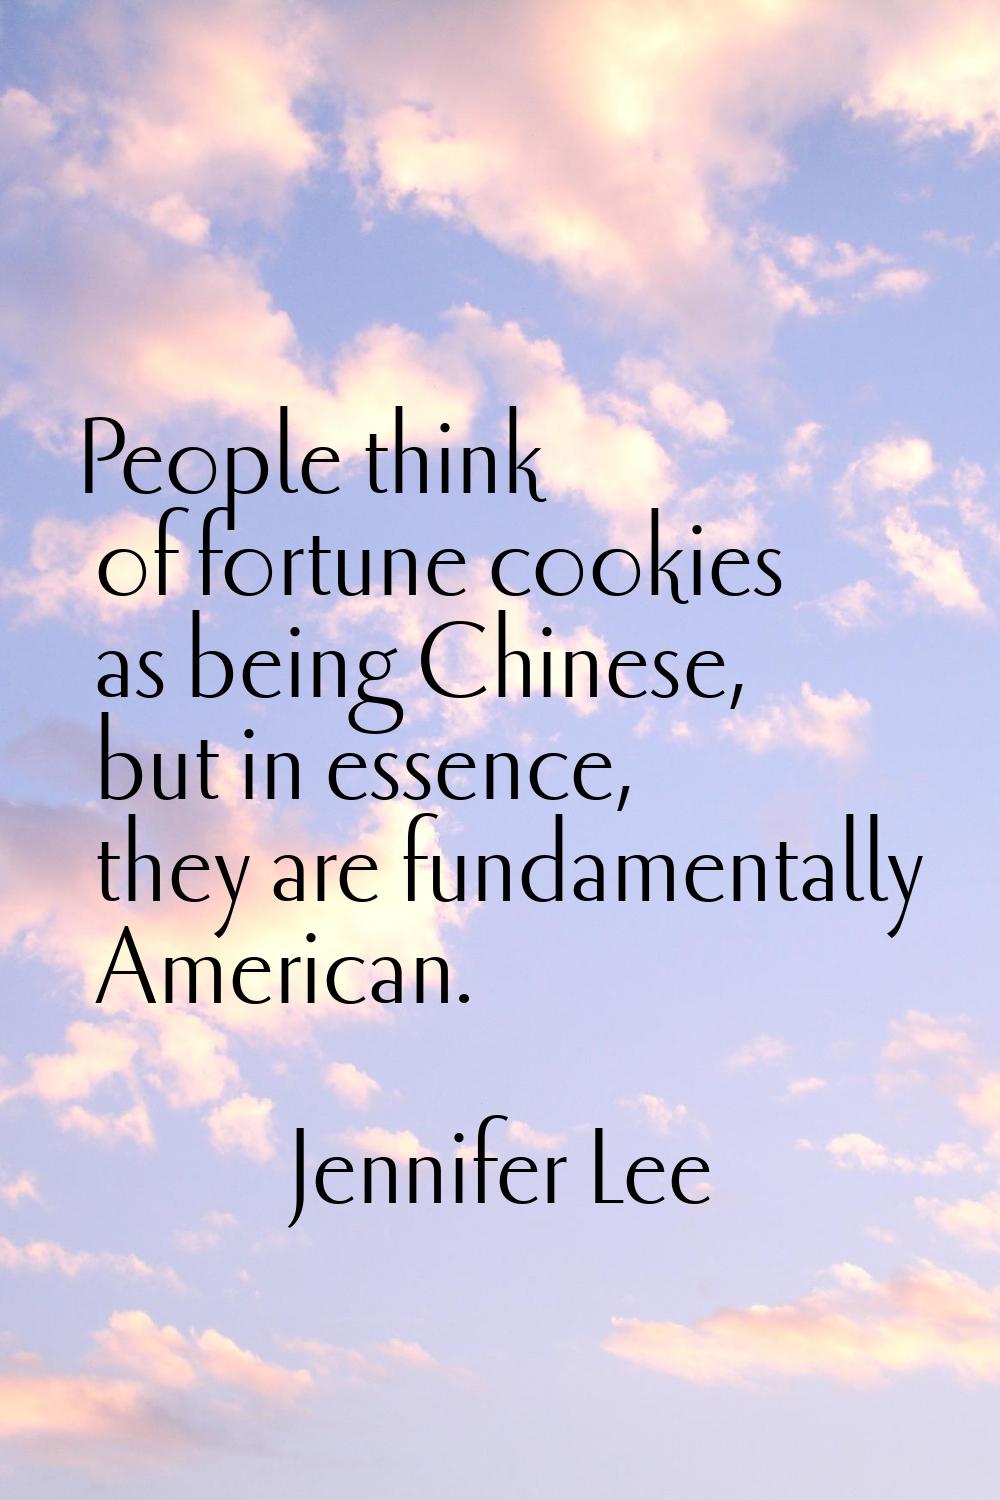 People think of fortune cookies as being Chinese, but in essence, they are fundamentally American.